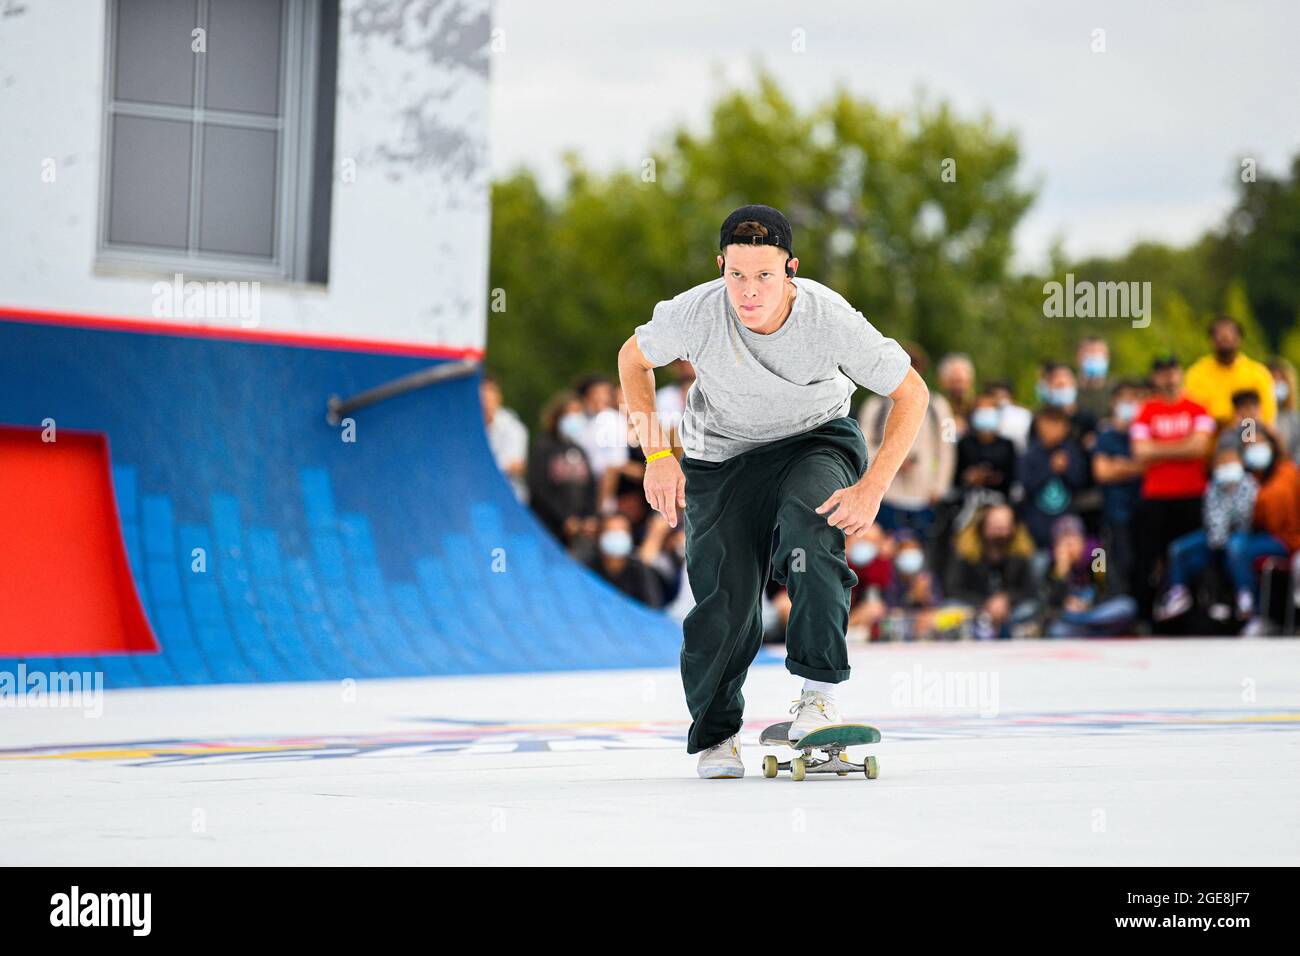 Paris, France. August 17, 2021, Jake Ilardi of United States of America  competes during the qualification day of the Red Bull Paris Conquest, where  some of the best street skaters in the